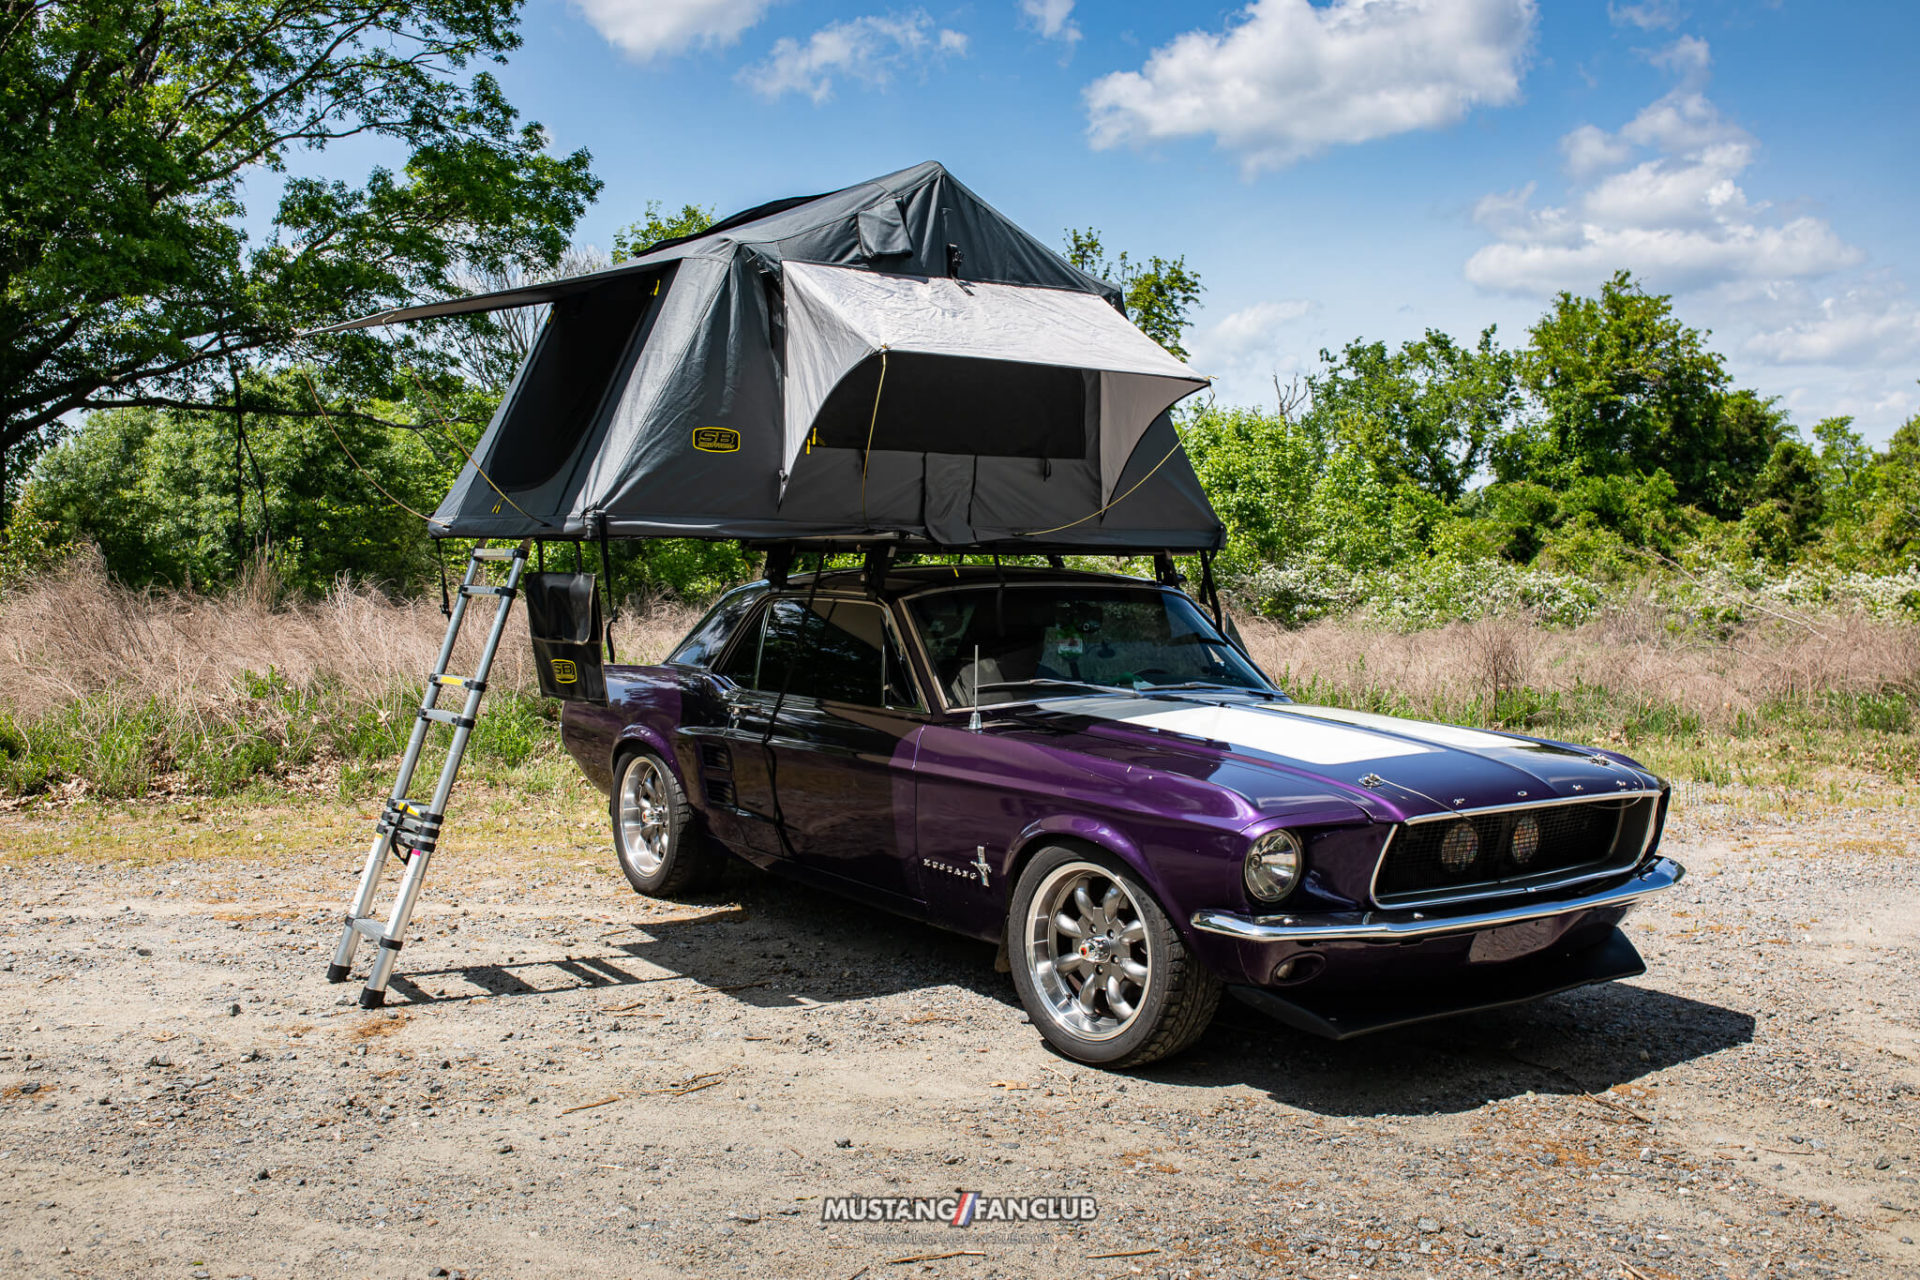 Drew and his family are traveling across the United States in their ’67 Mustang!